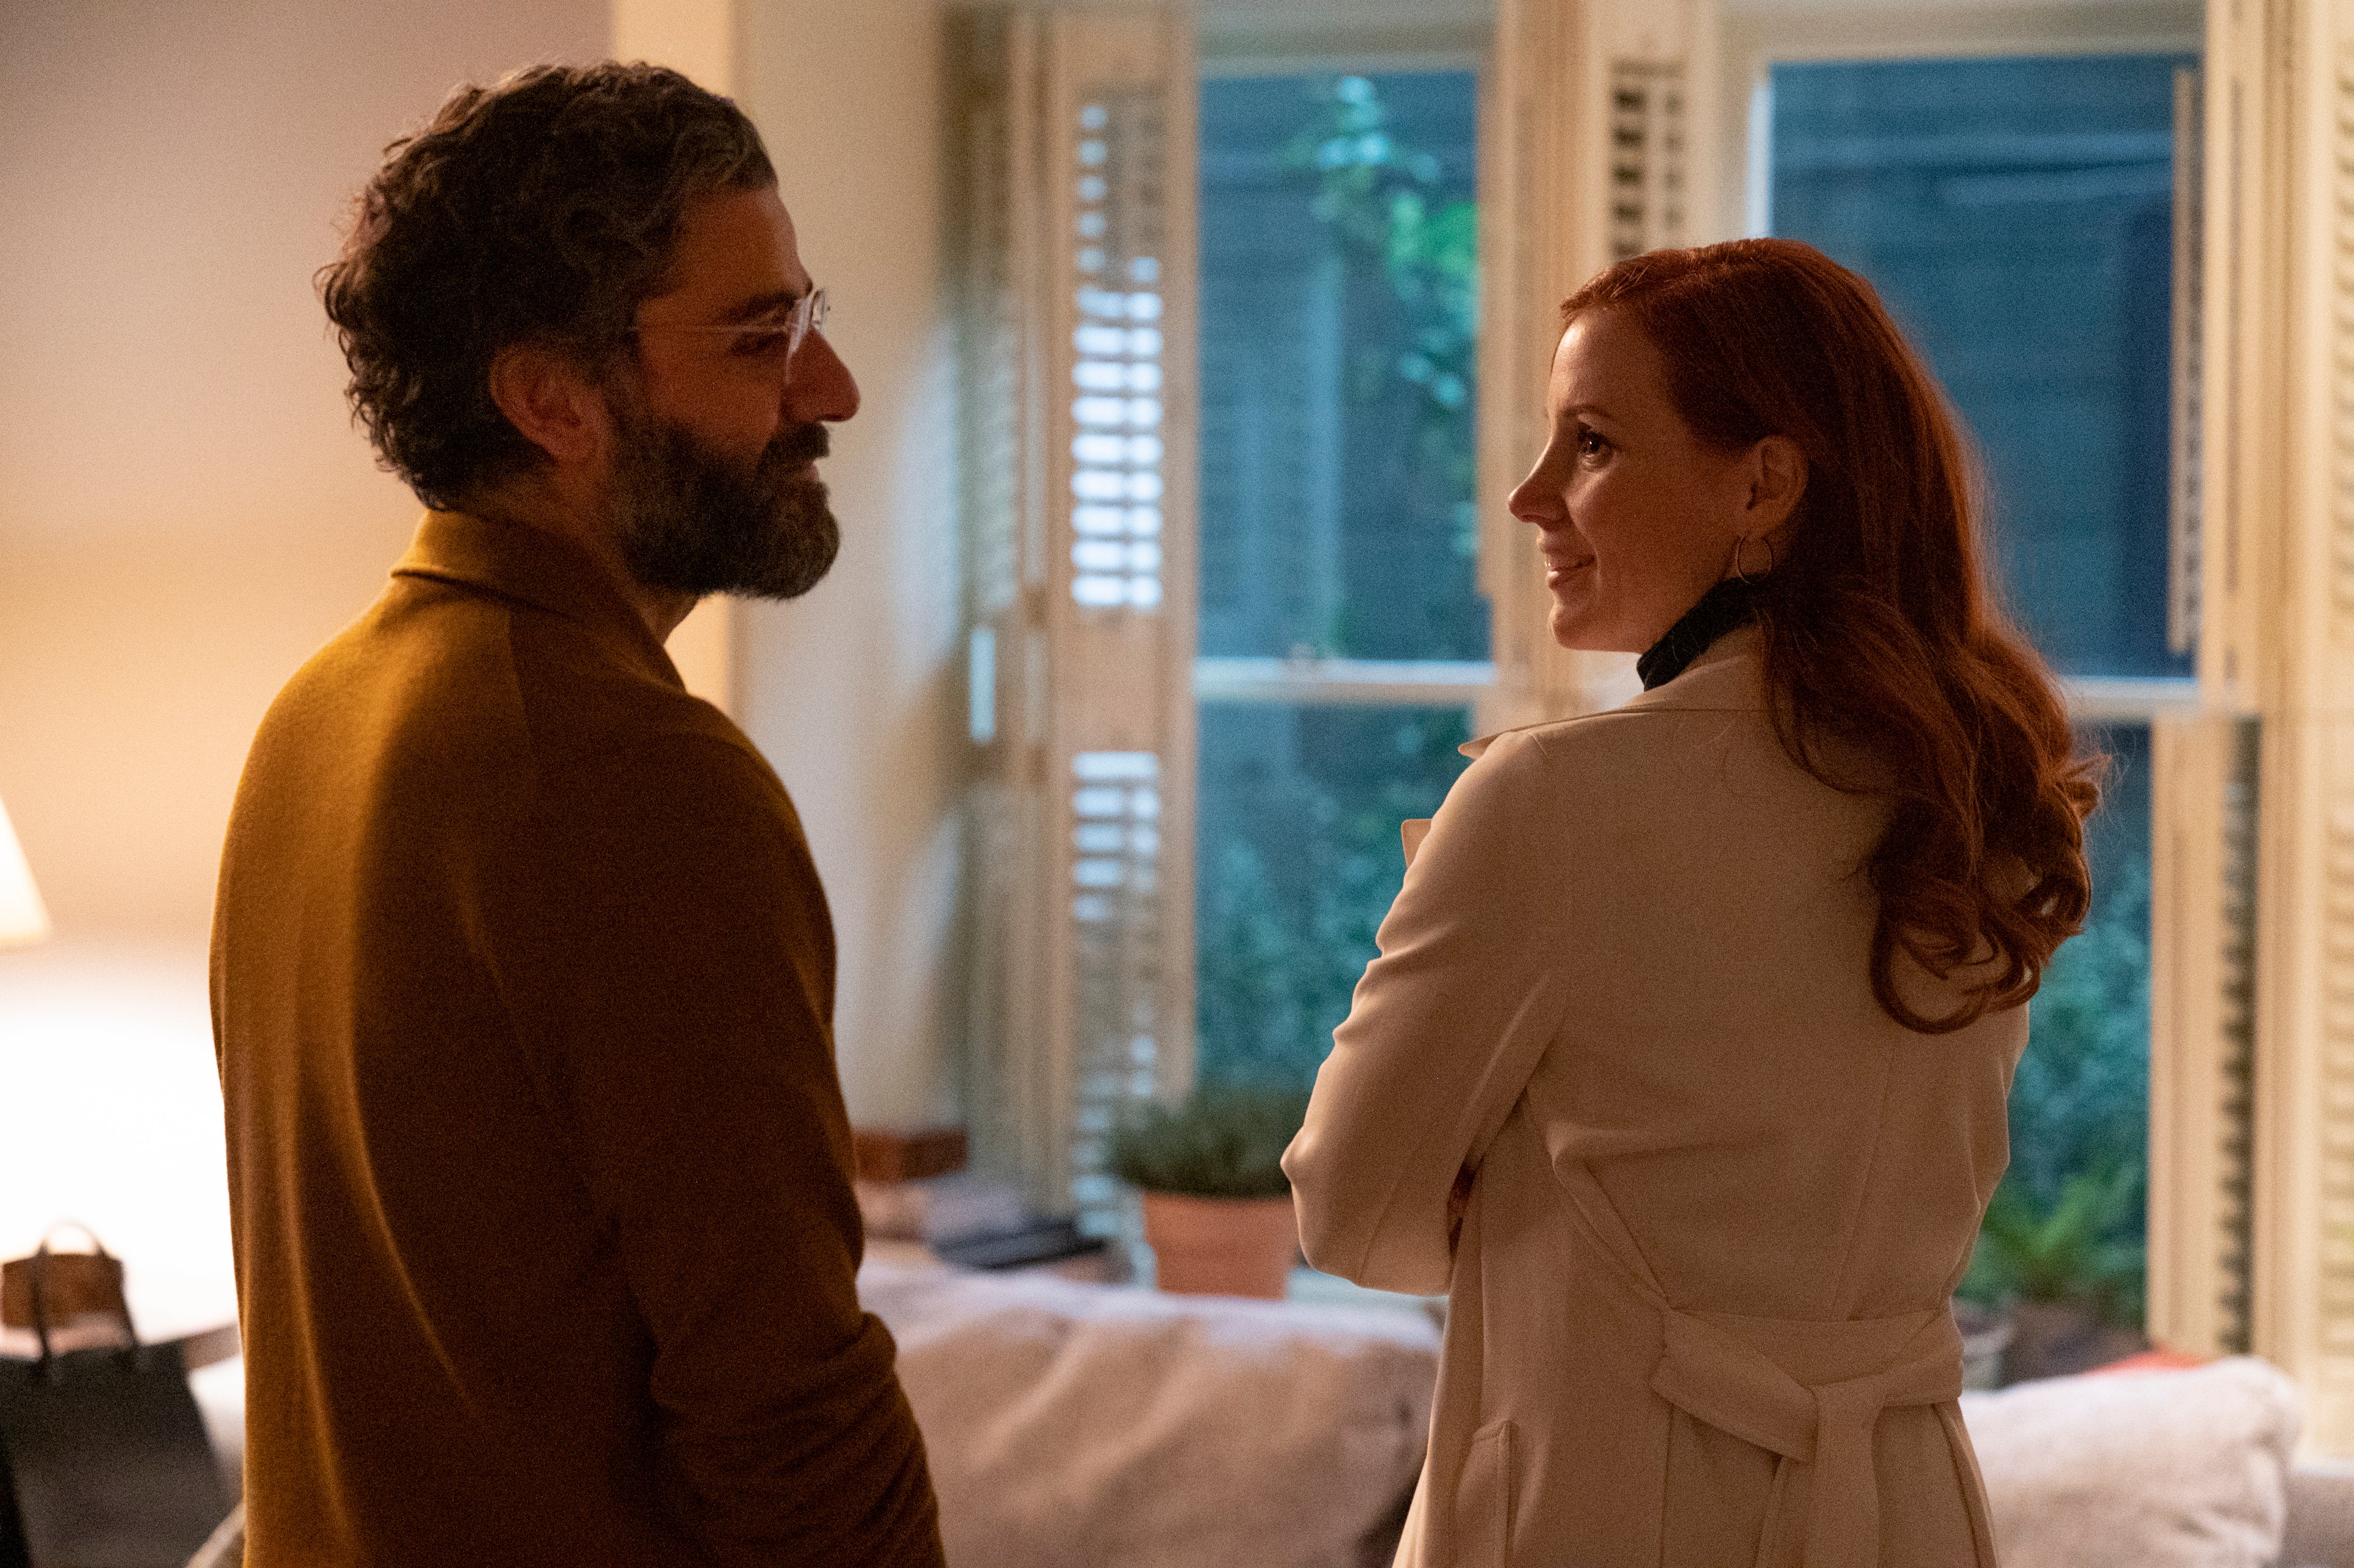 Isaac and Chastain in ‘Scenes From a Marriage’